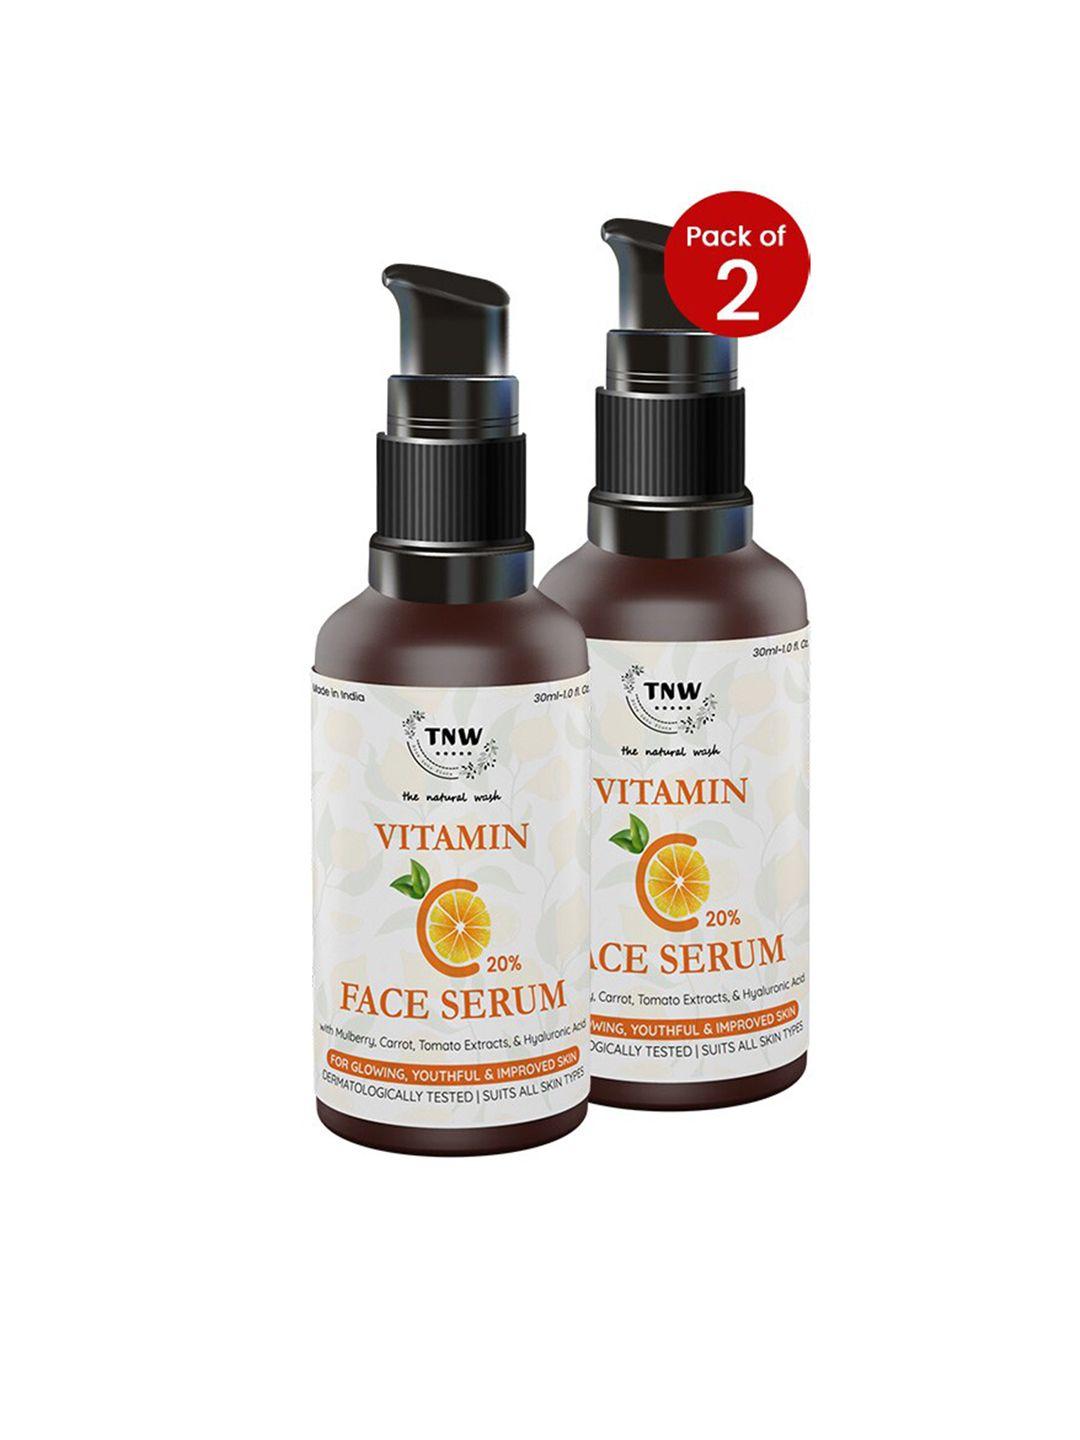 tnw the natural wash set of 2 vitamin c face serum with mulberry & carrot - 30 ml each